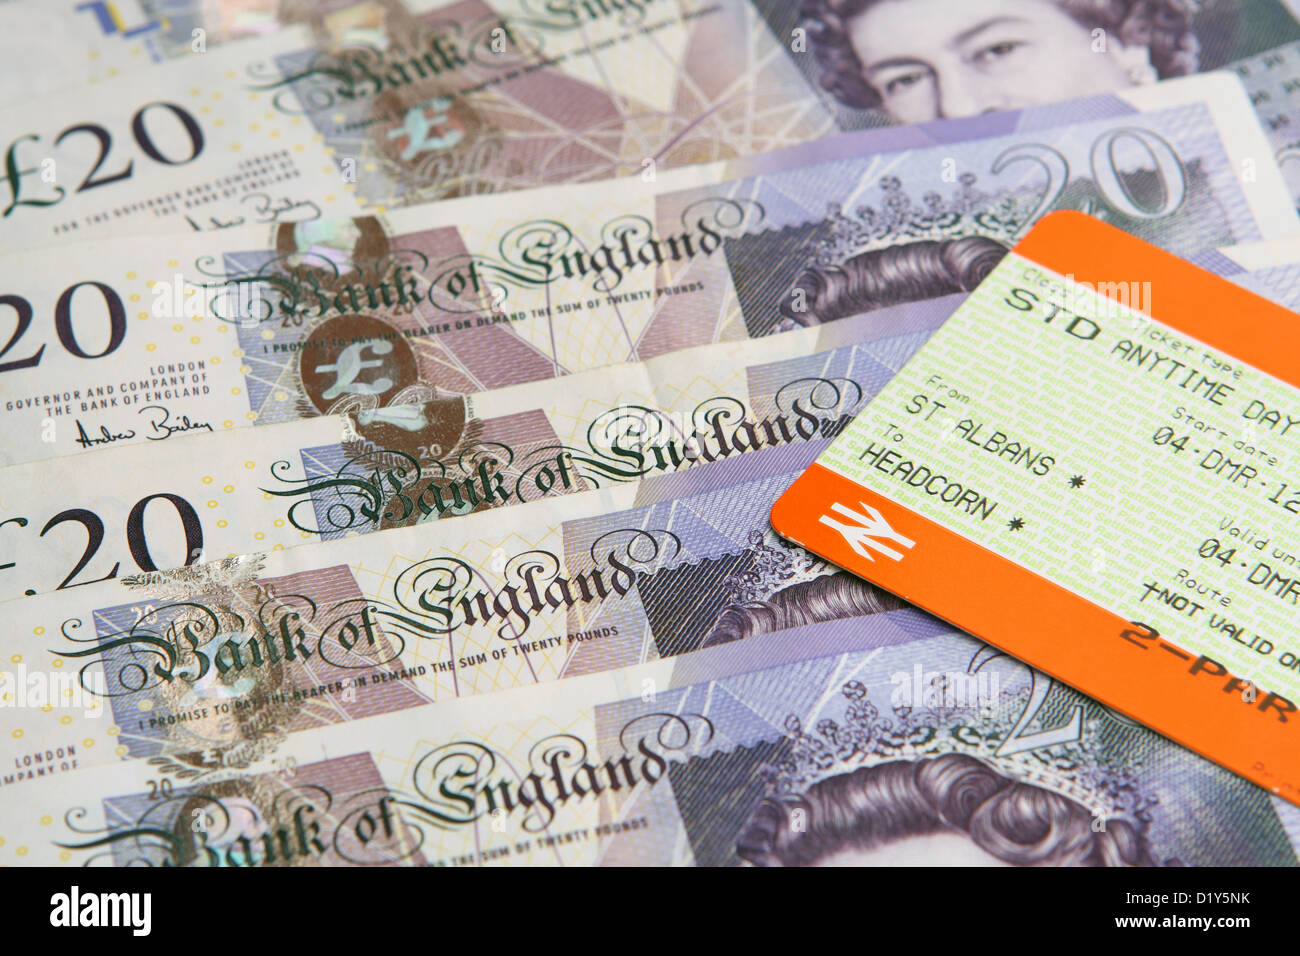 A rail ticket on top of sterling £20 notes Stock Photo